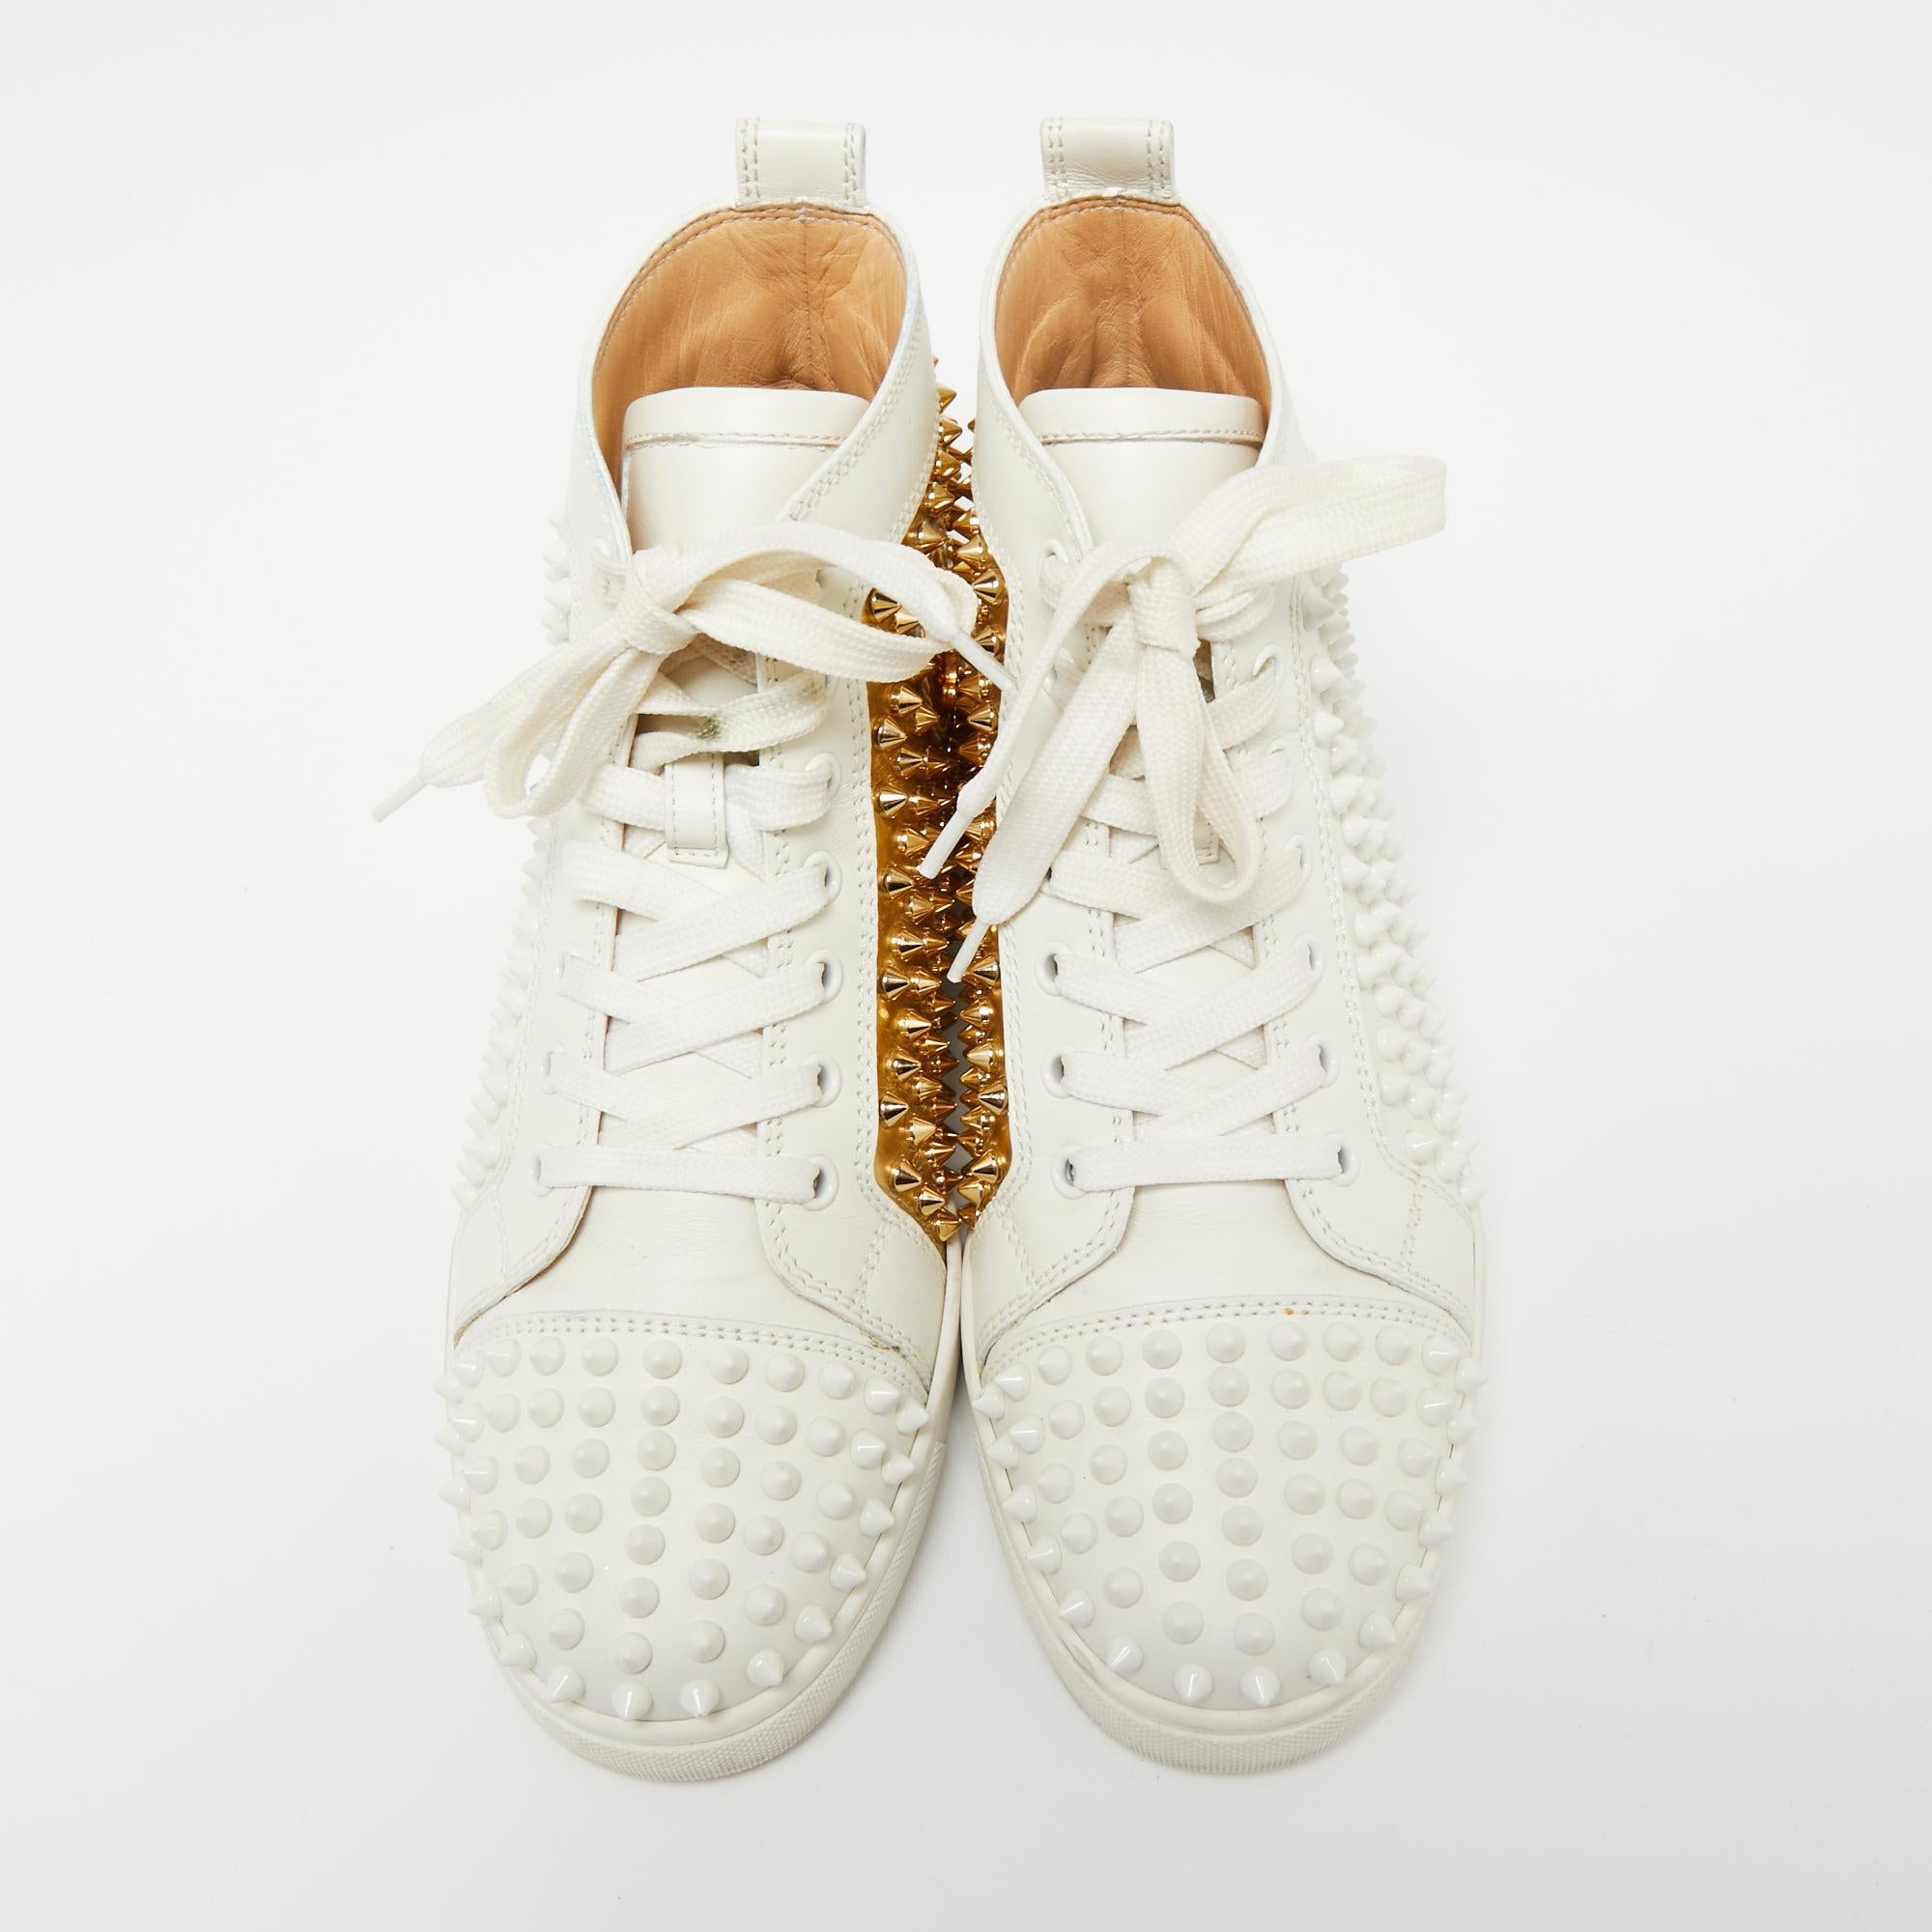 Feel great in your casual wear every time you step out in these sneakers from Christian Louboutin. They have been crafted from leather and styled as a high top with an exterior detailed with tonal spikes. The sneakers carry round toes, lace-up